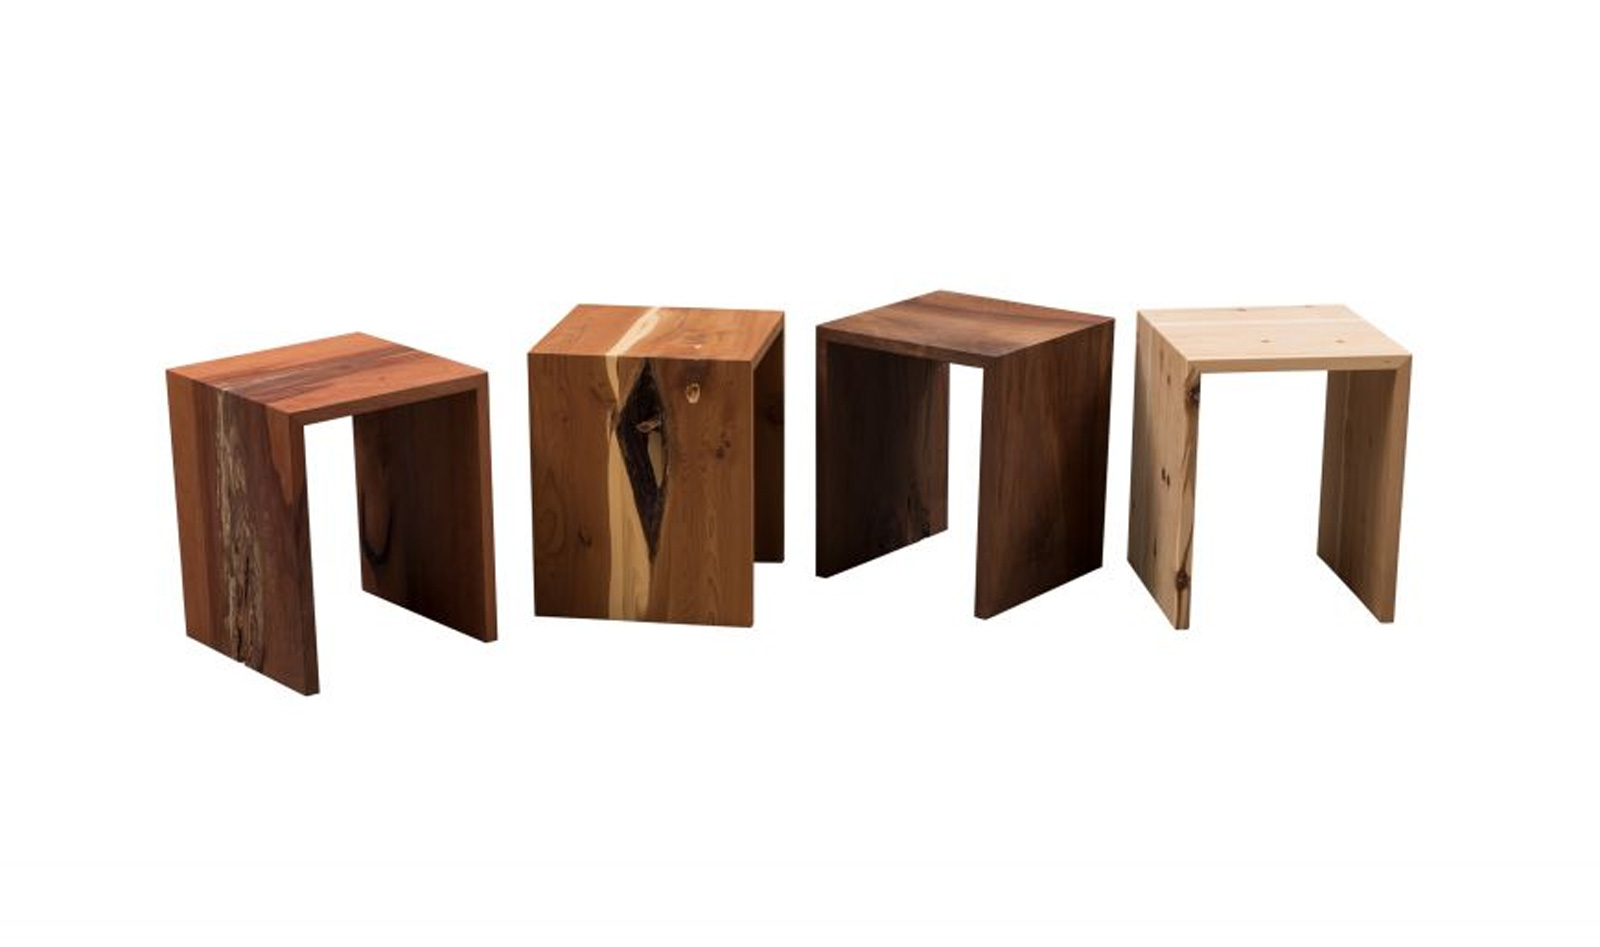 Design stool or side table made of solid wood from the monastery carpentry Fischingen, Swiss Made 